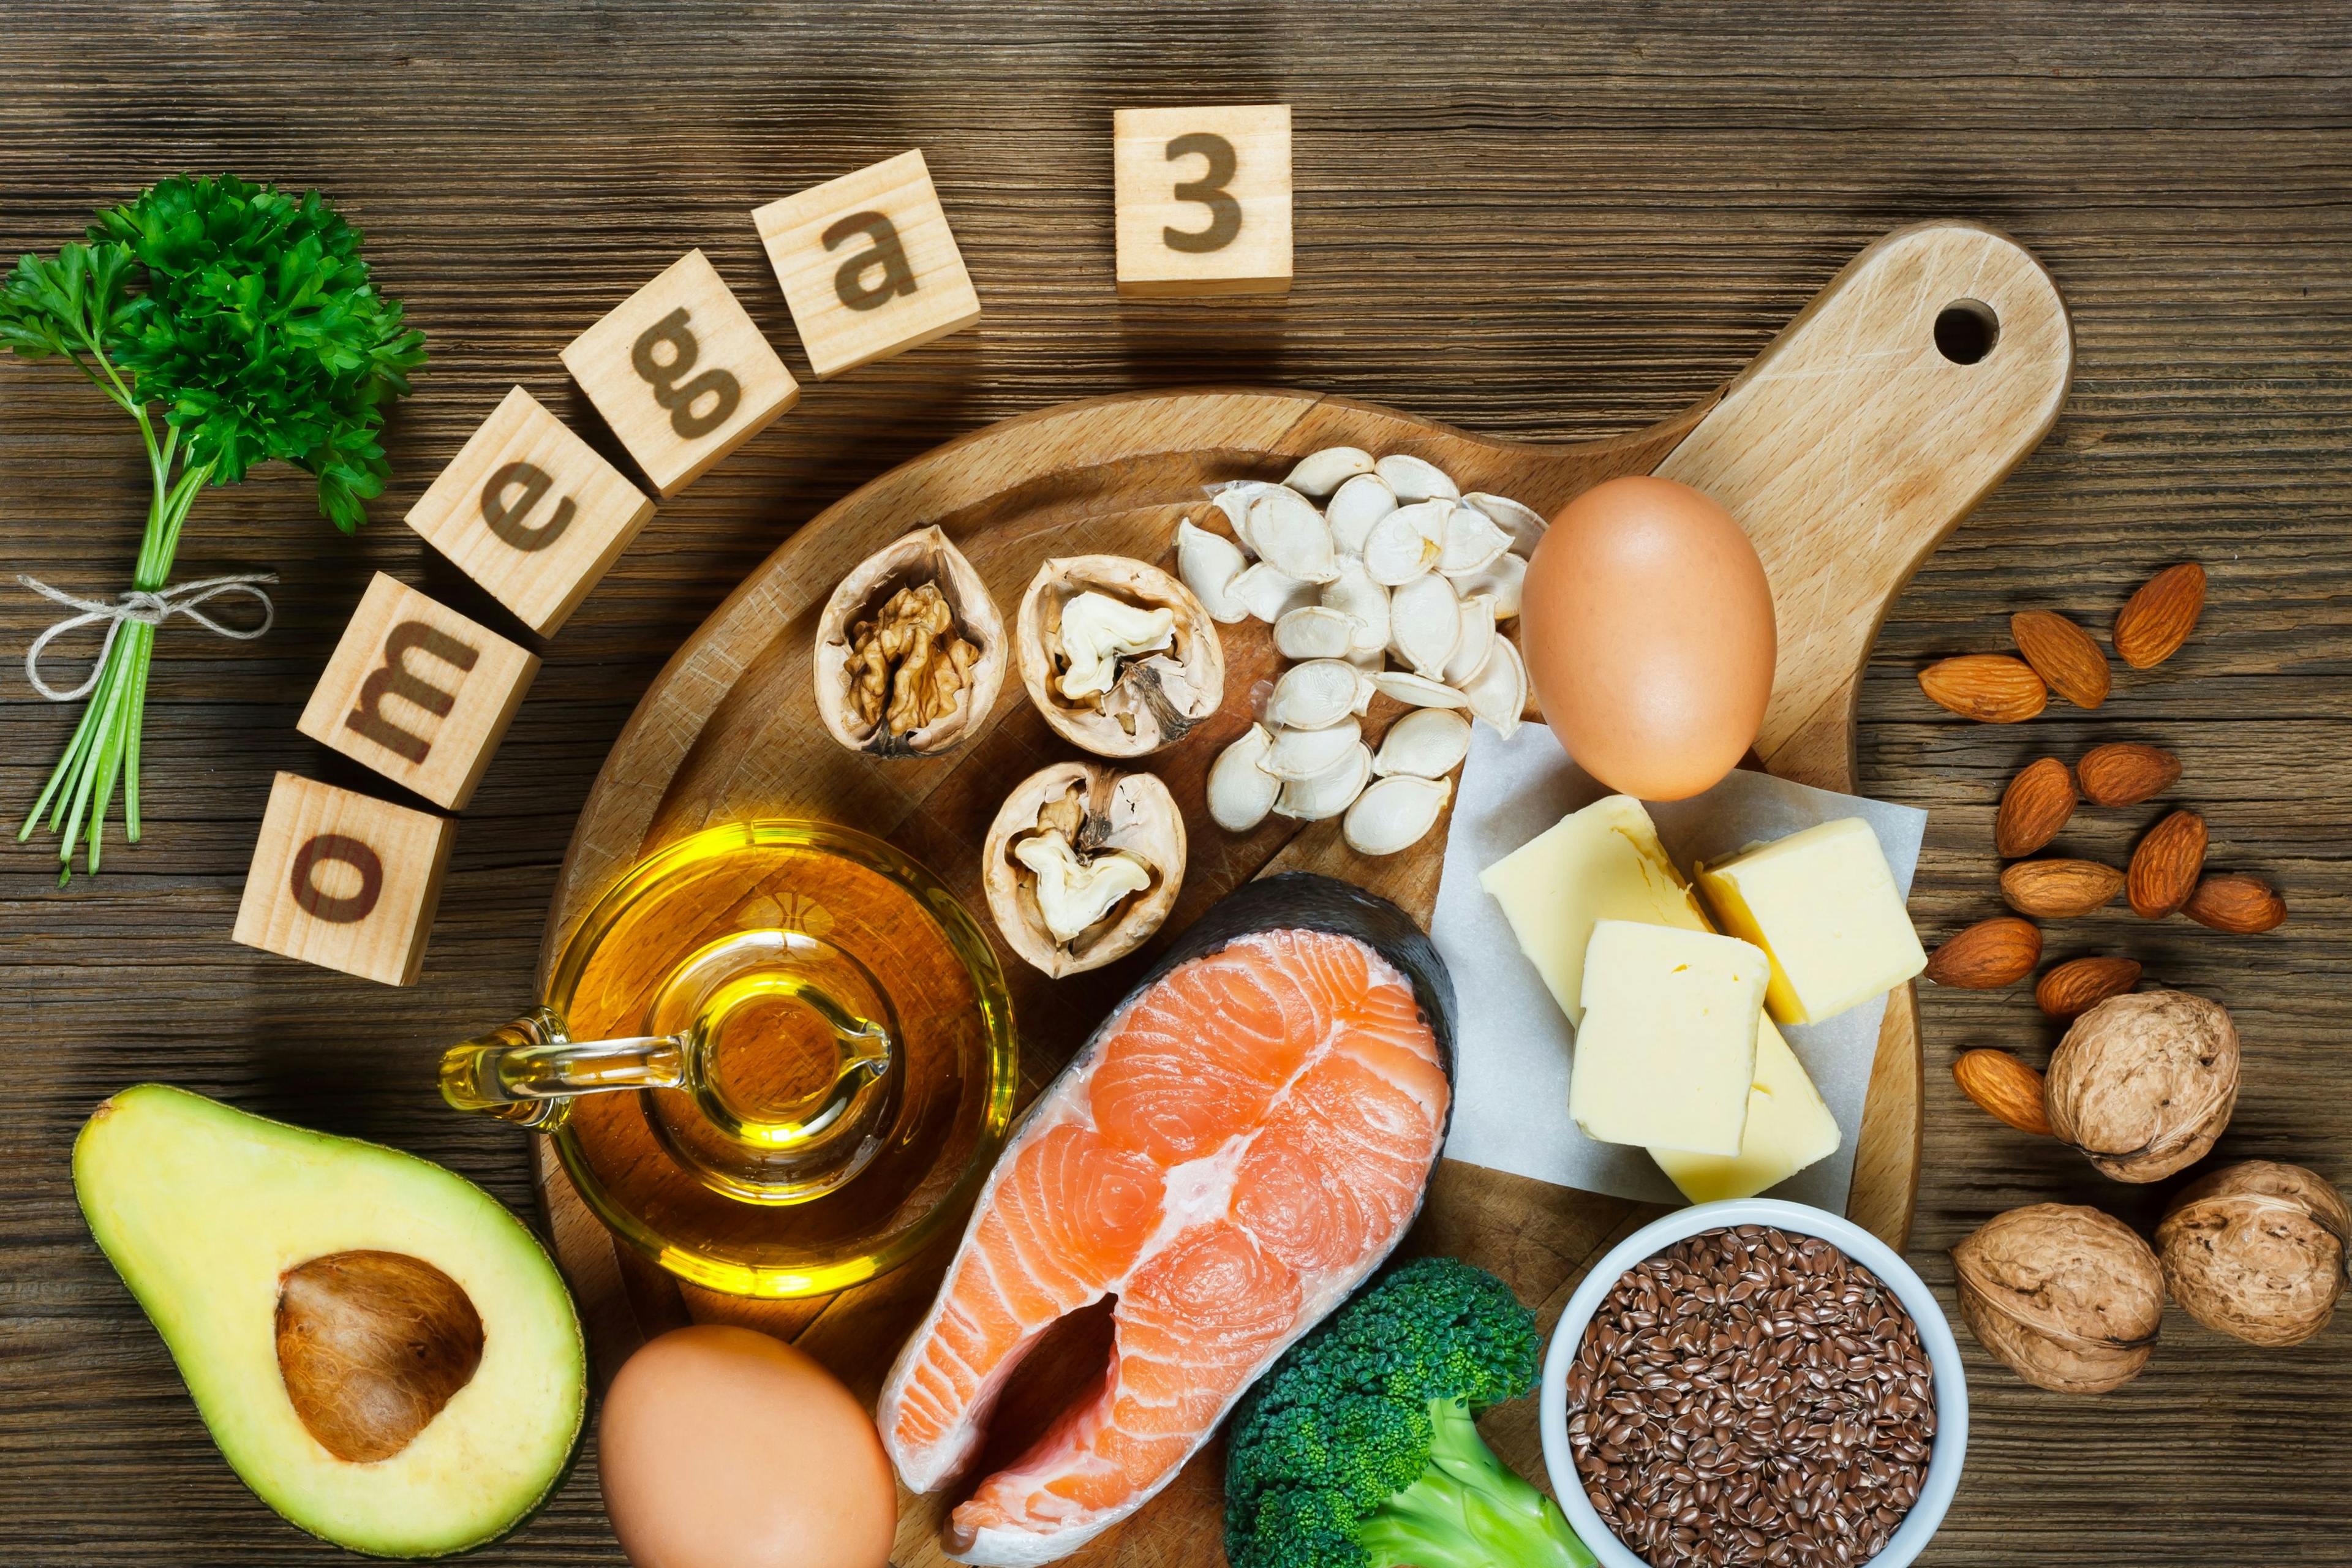 The omega-3 fatty acids EPA and DHA may protect against COVID-19 by reducing inflammation.